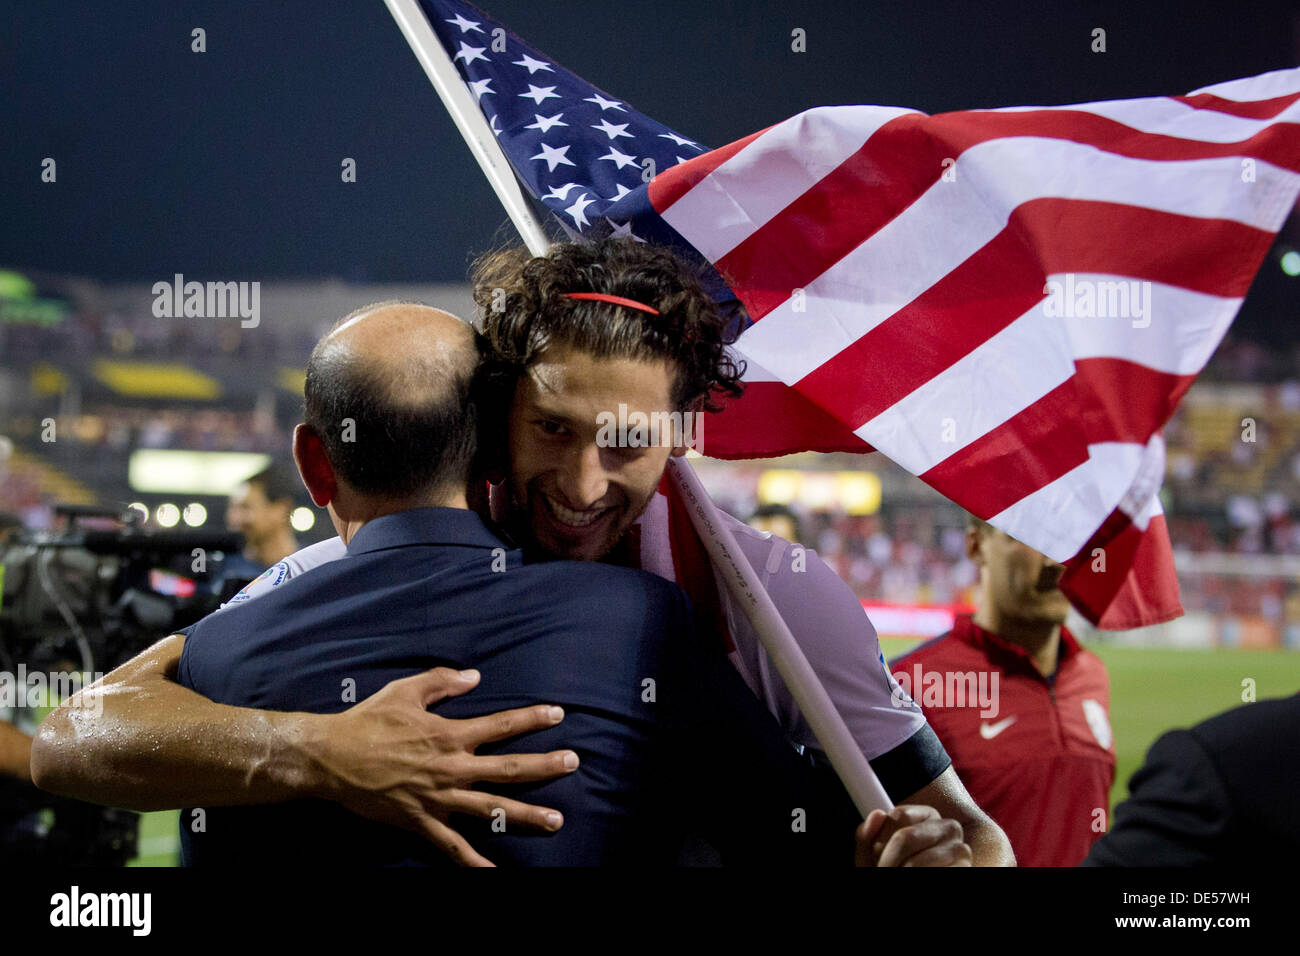 Columbus, Ohio, USA. 10th Sep, 2013. September 10, 2013: US Men's National Team defender Omar Gonzalez (3) holds the American flag and receives a hug after the U.S. Men's National Team defeated The Mexico National Team 2-0 during a - World Cup Qualifier match at Columbus Crew Stadium - Columbus, OH. The United States Men's National Team clinched a spot for the World Cup in Brazil. © csm/Alamy Live News Stock Photo